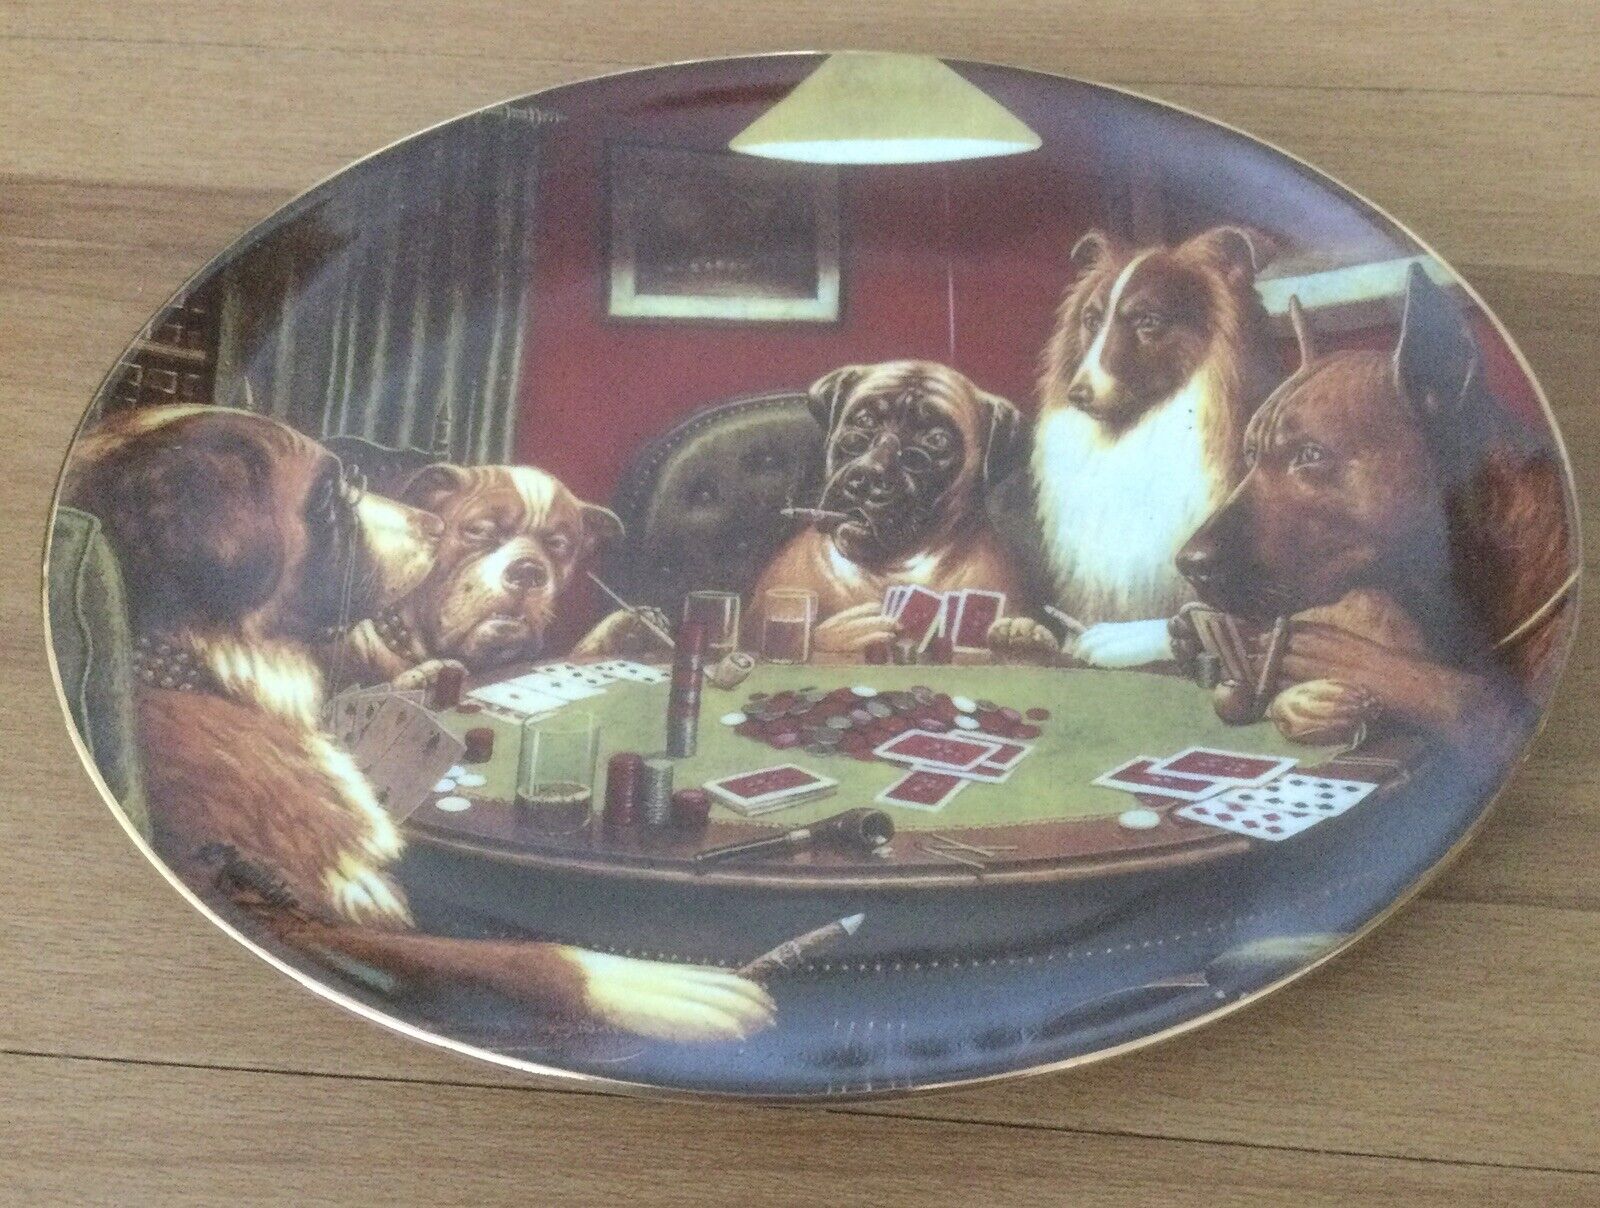 High stakes Limited edition porcelain plate